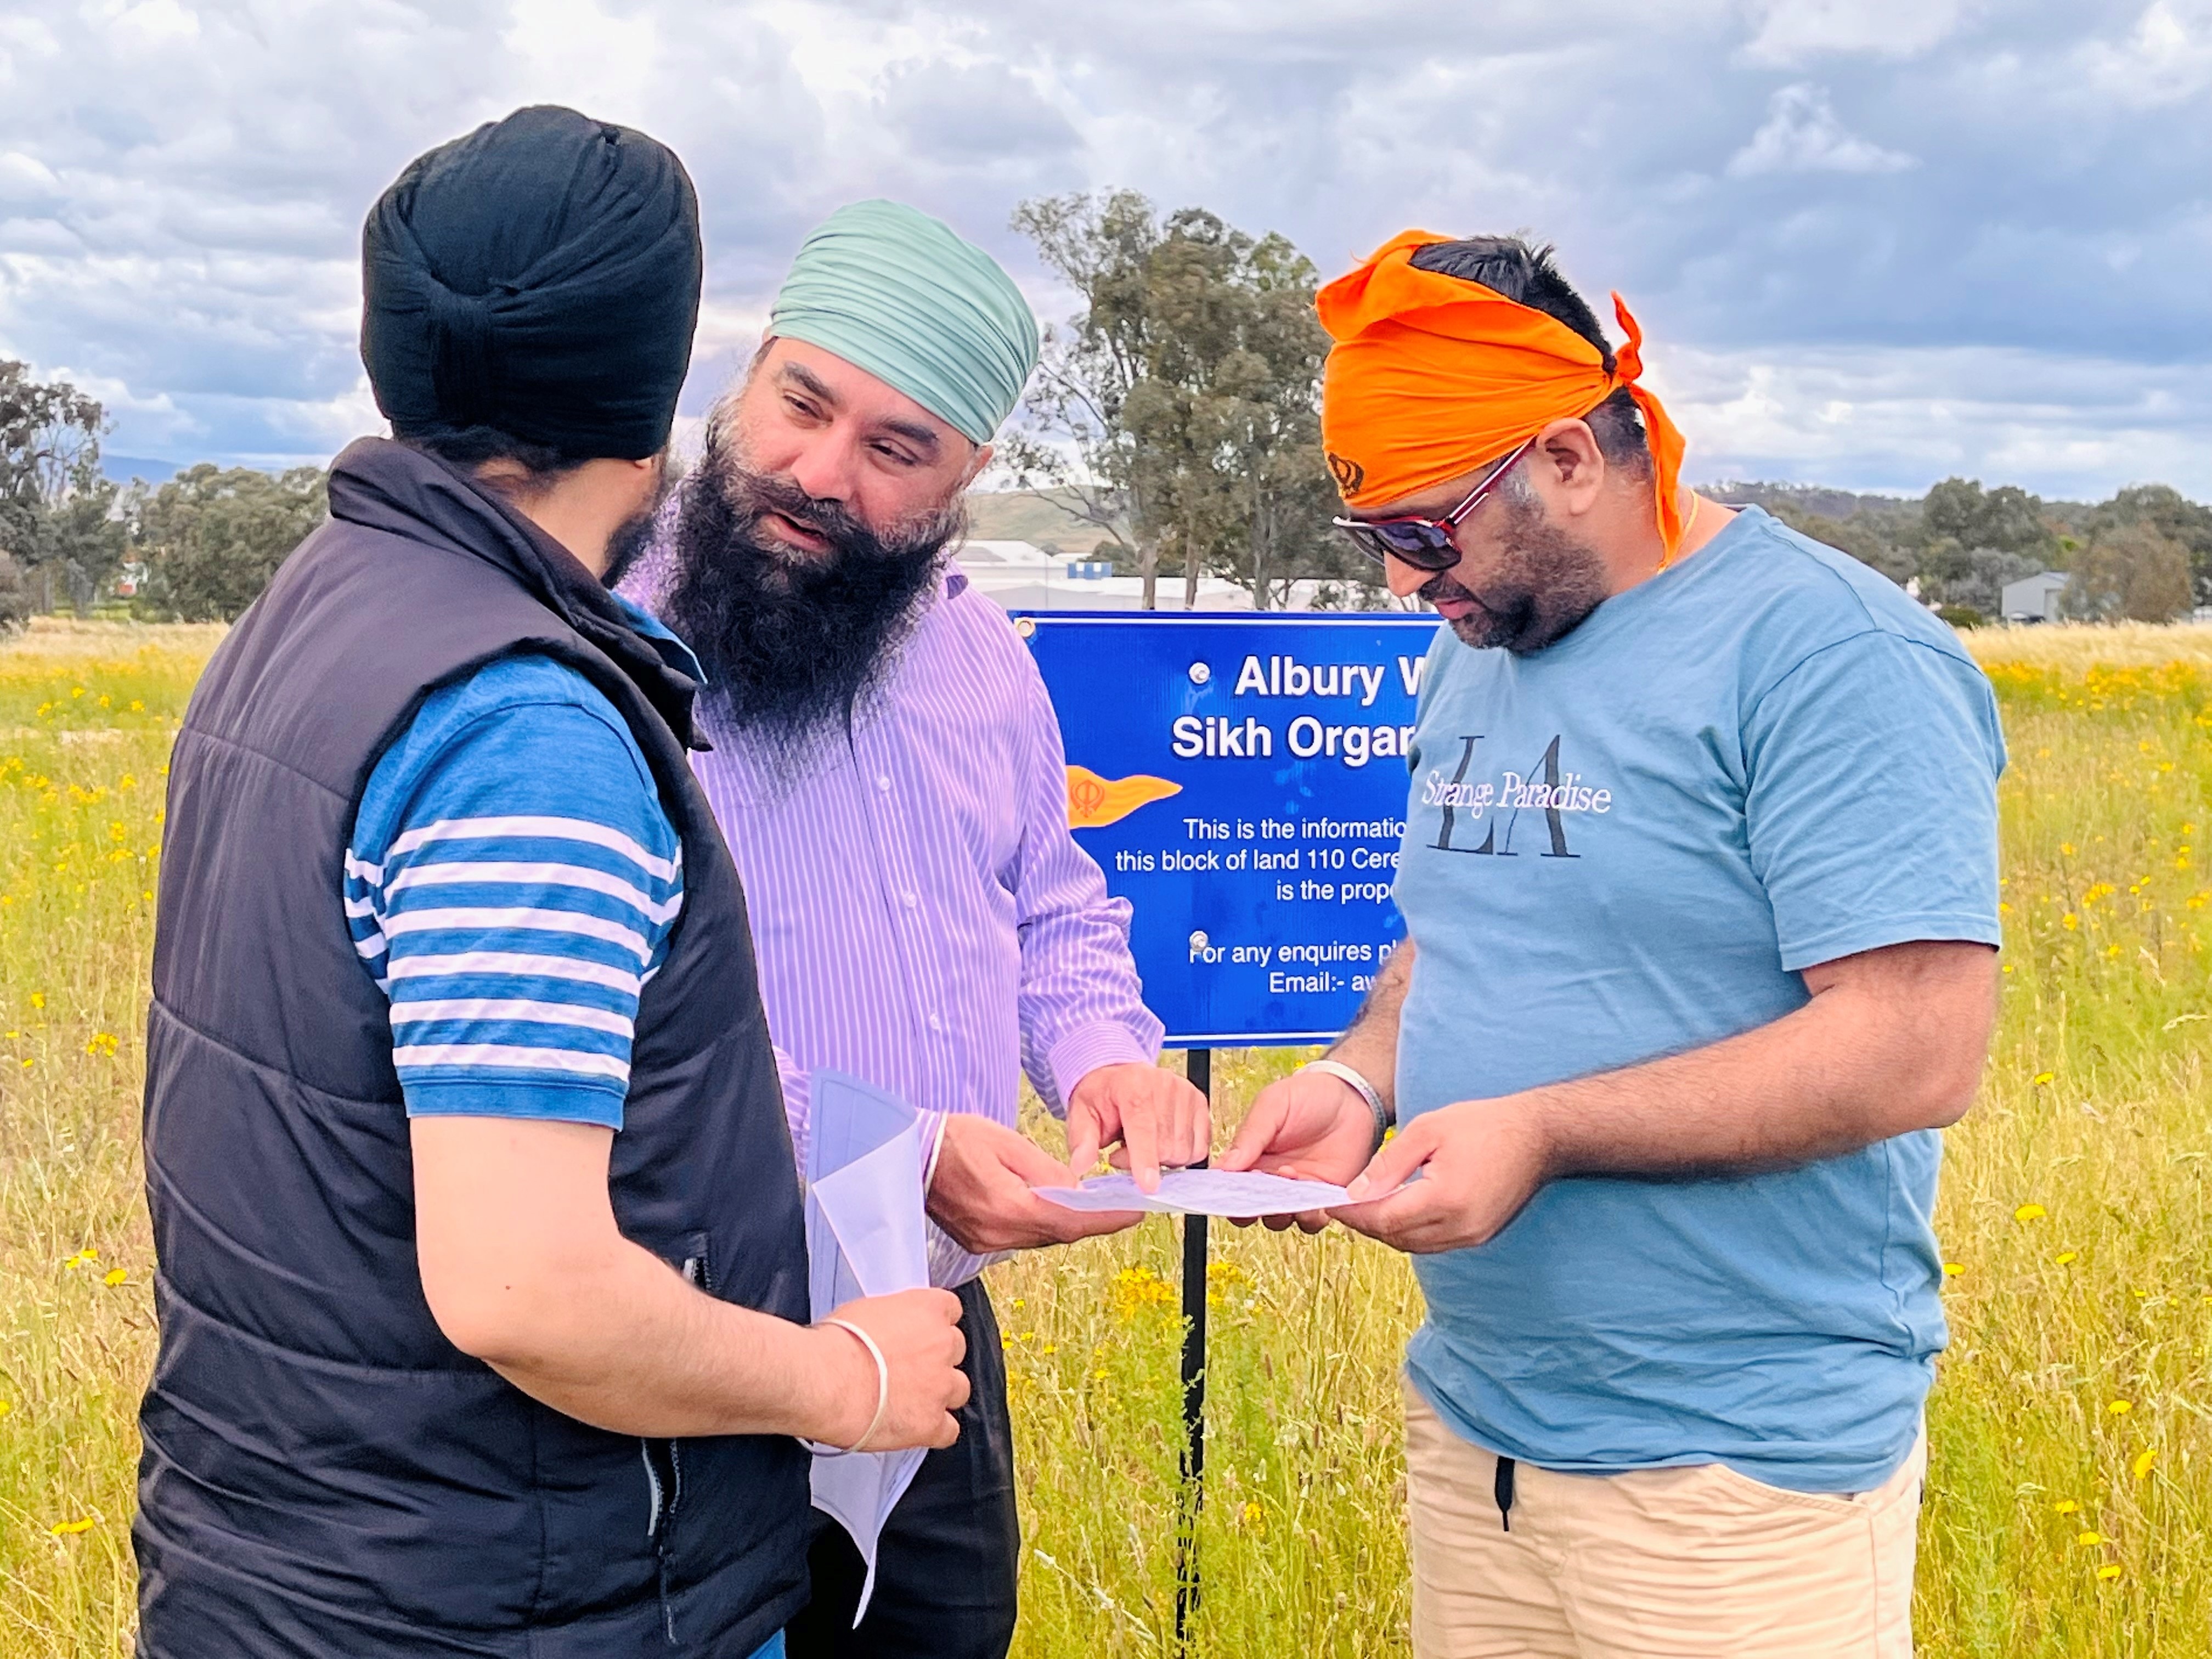 Gurminder Singh (center) chats with other members of the Sikh community at the New Gurdwara site.